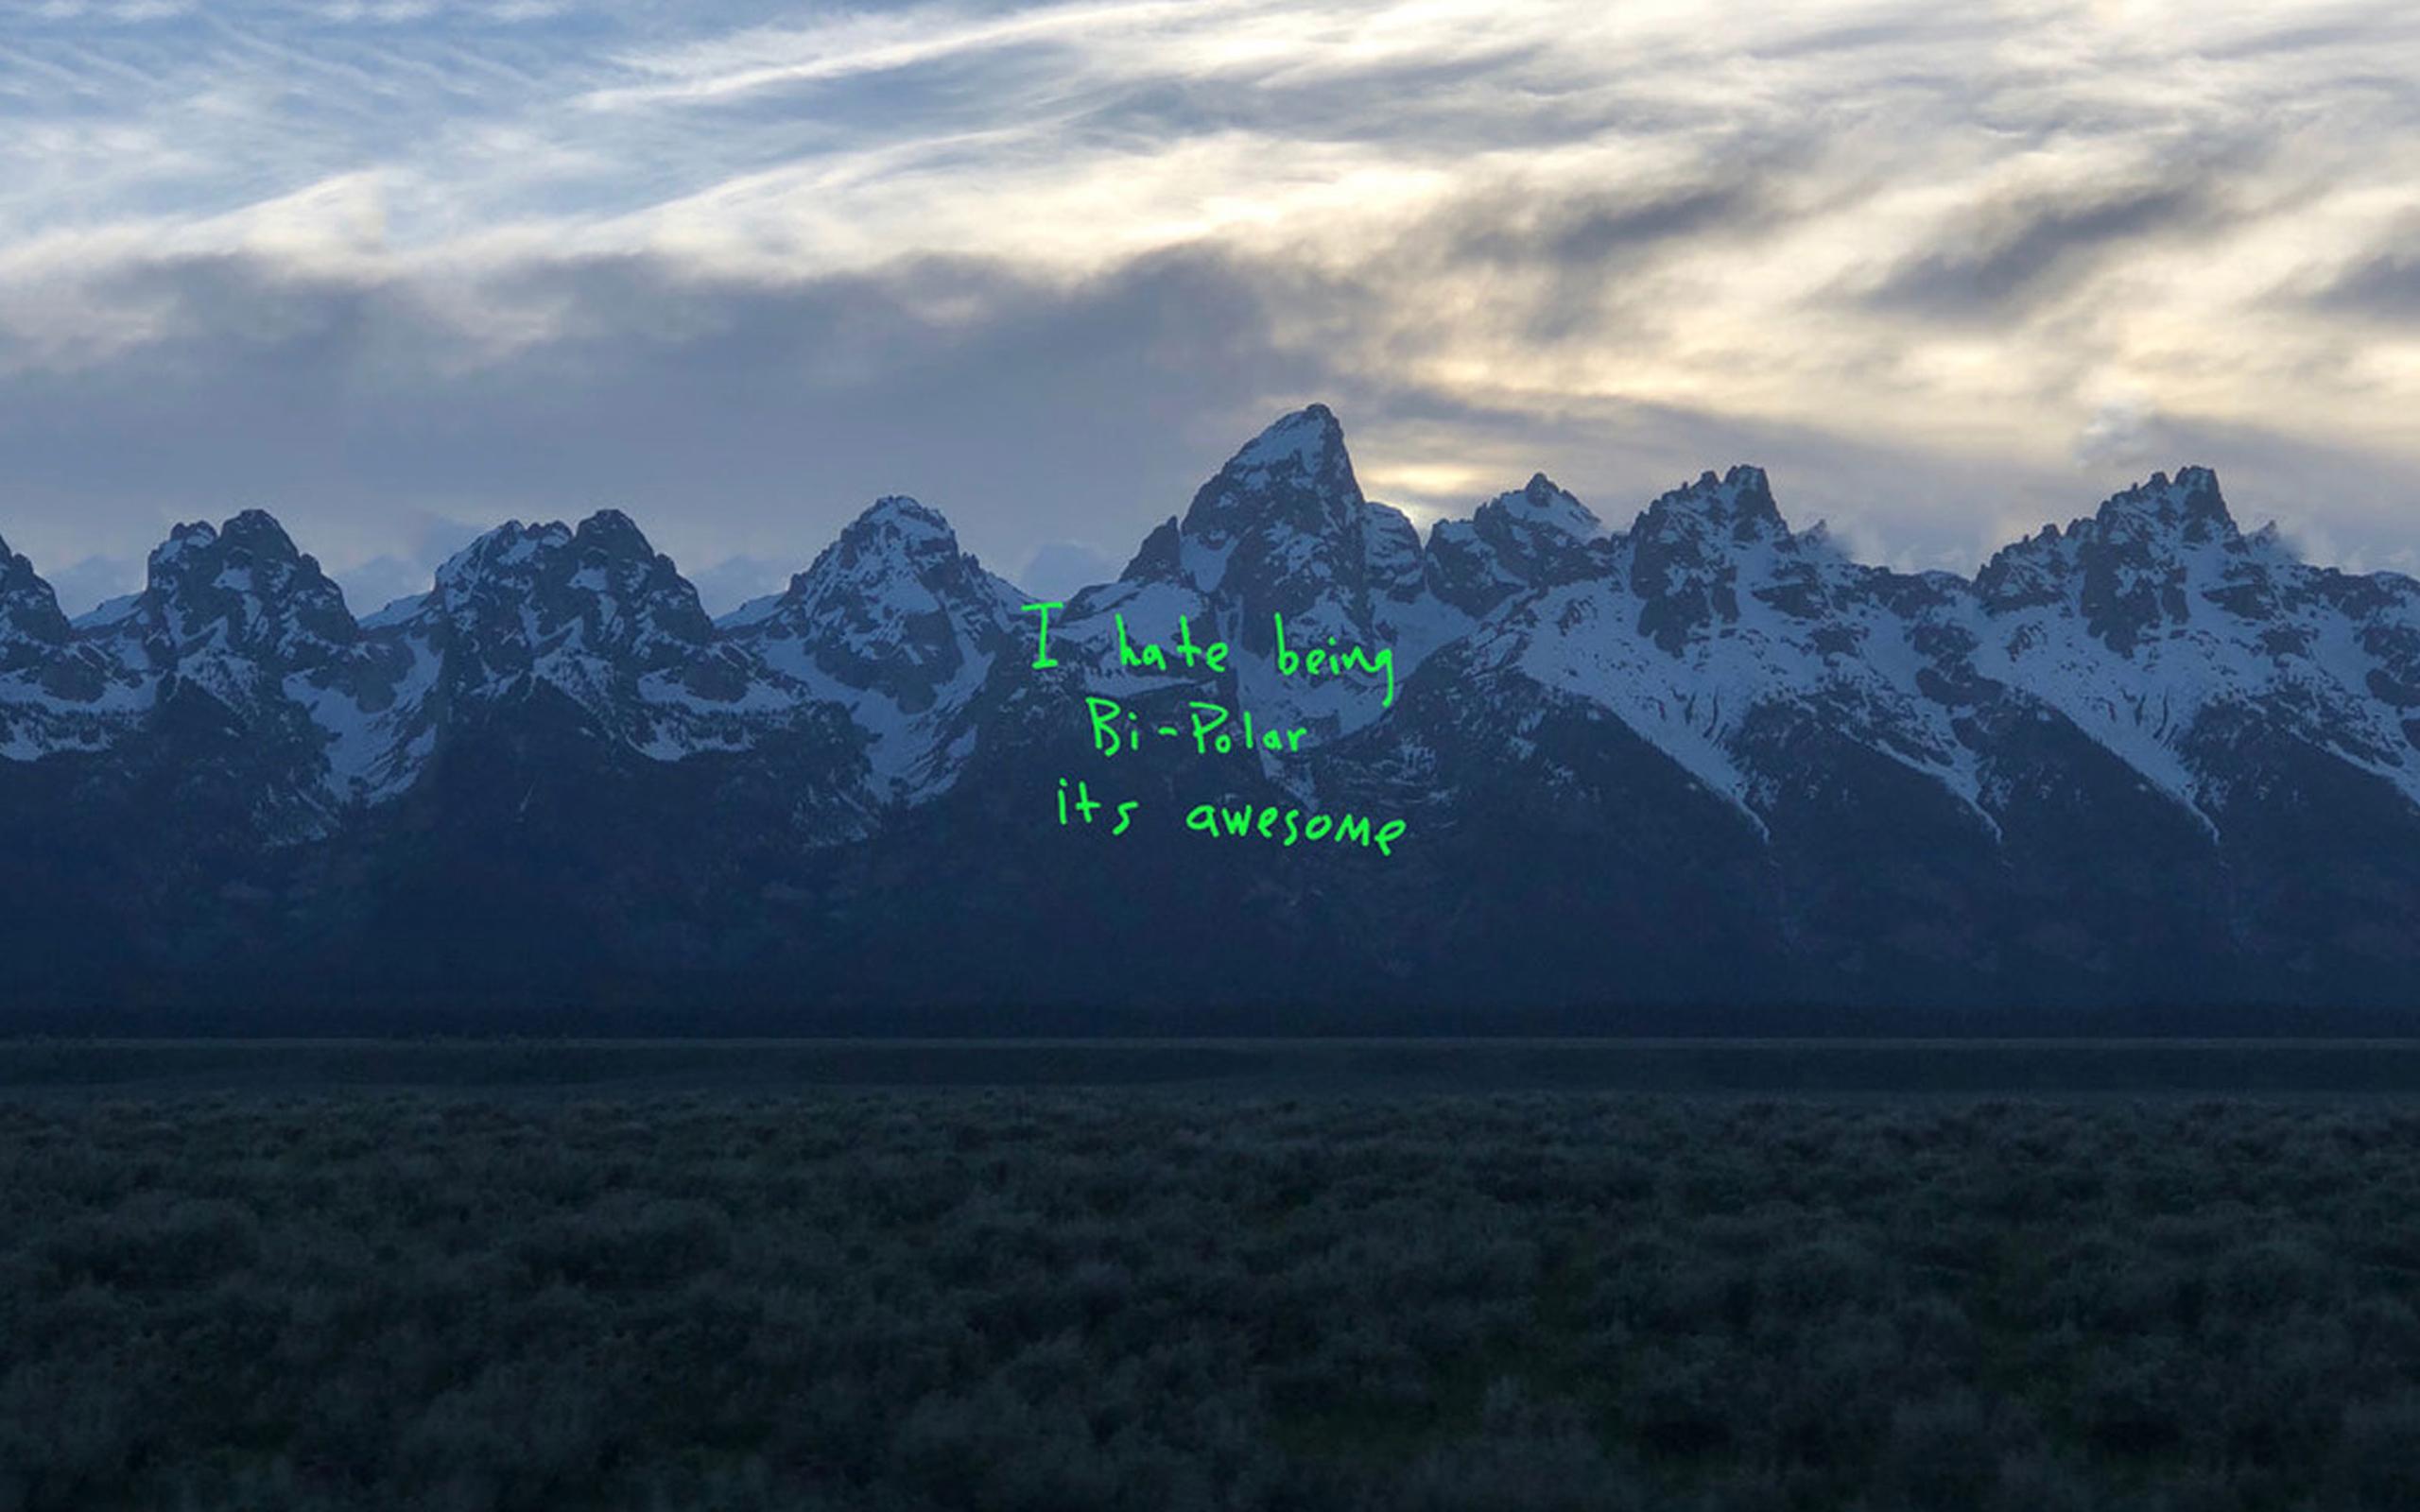 Kanye West Ye Wallpapers  Wallpaper Cave